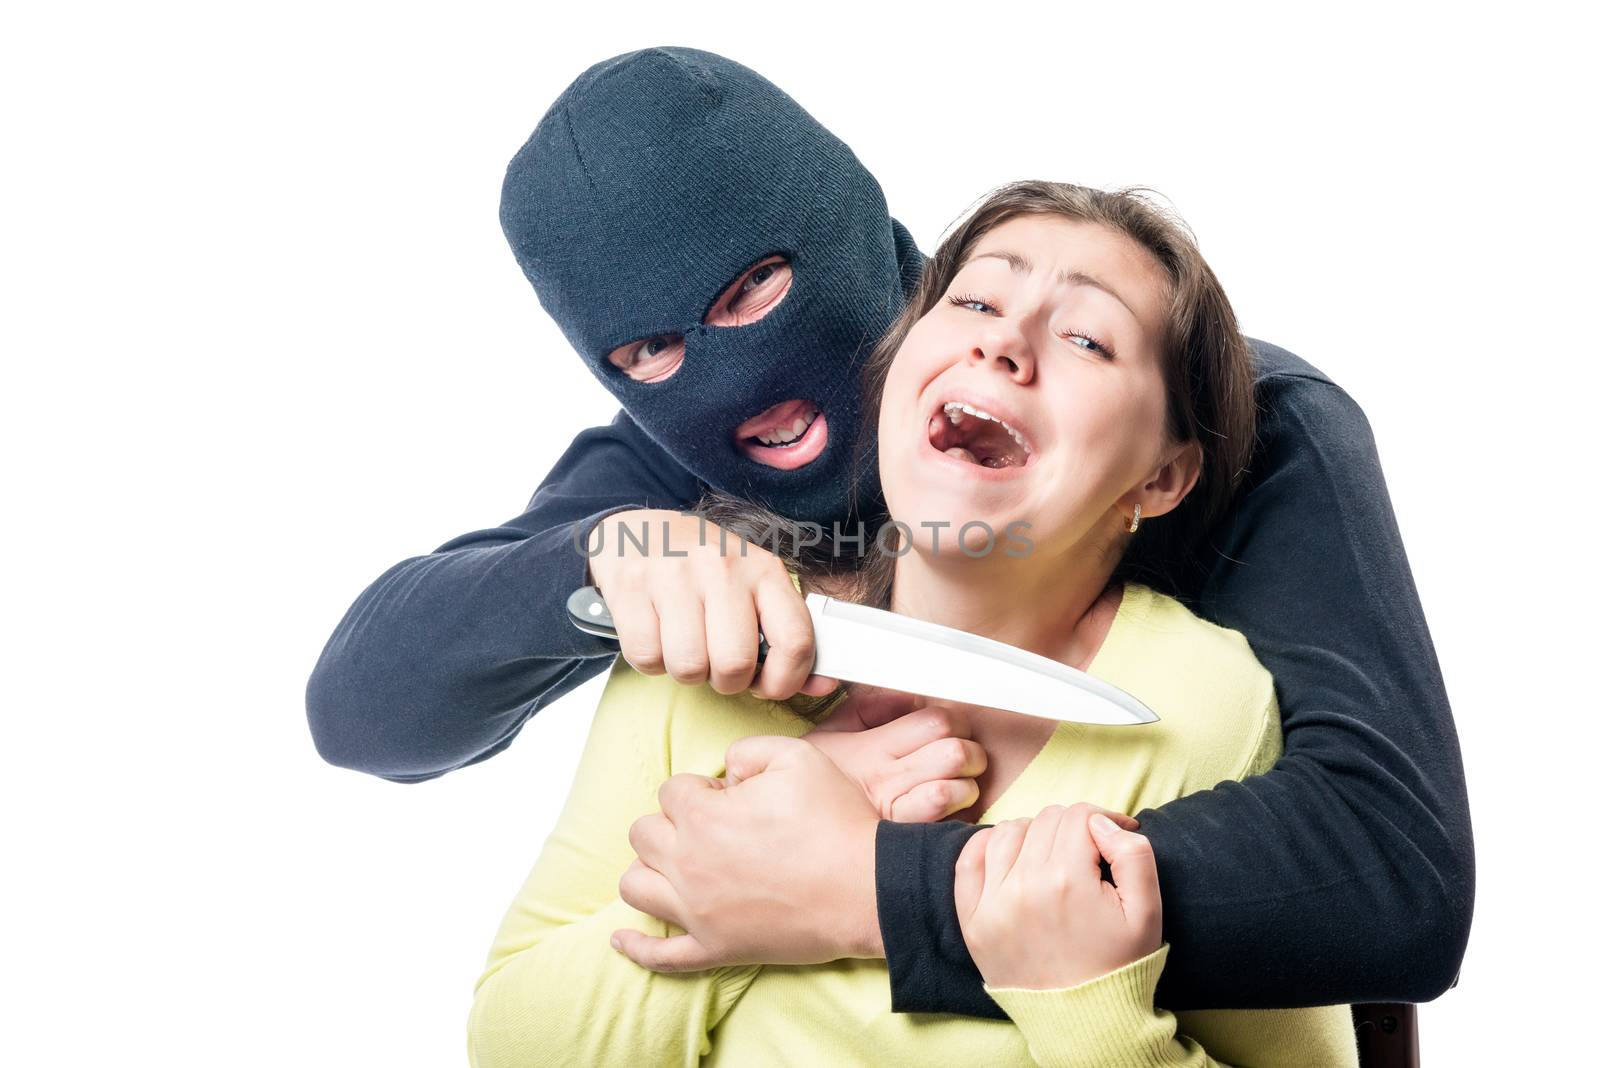 A terrorist in a balaclava threatens a victim with a knife against a white background